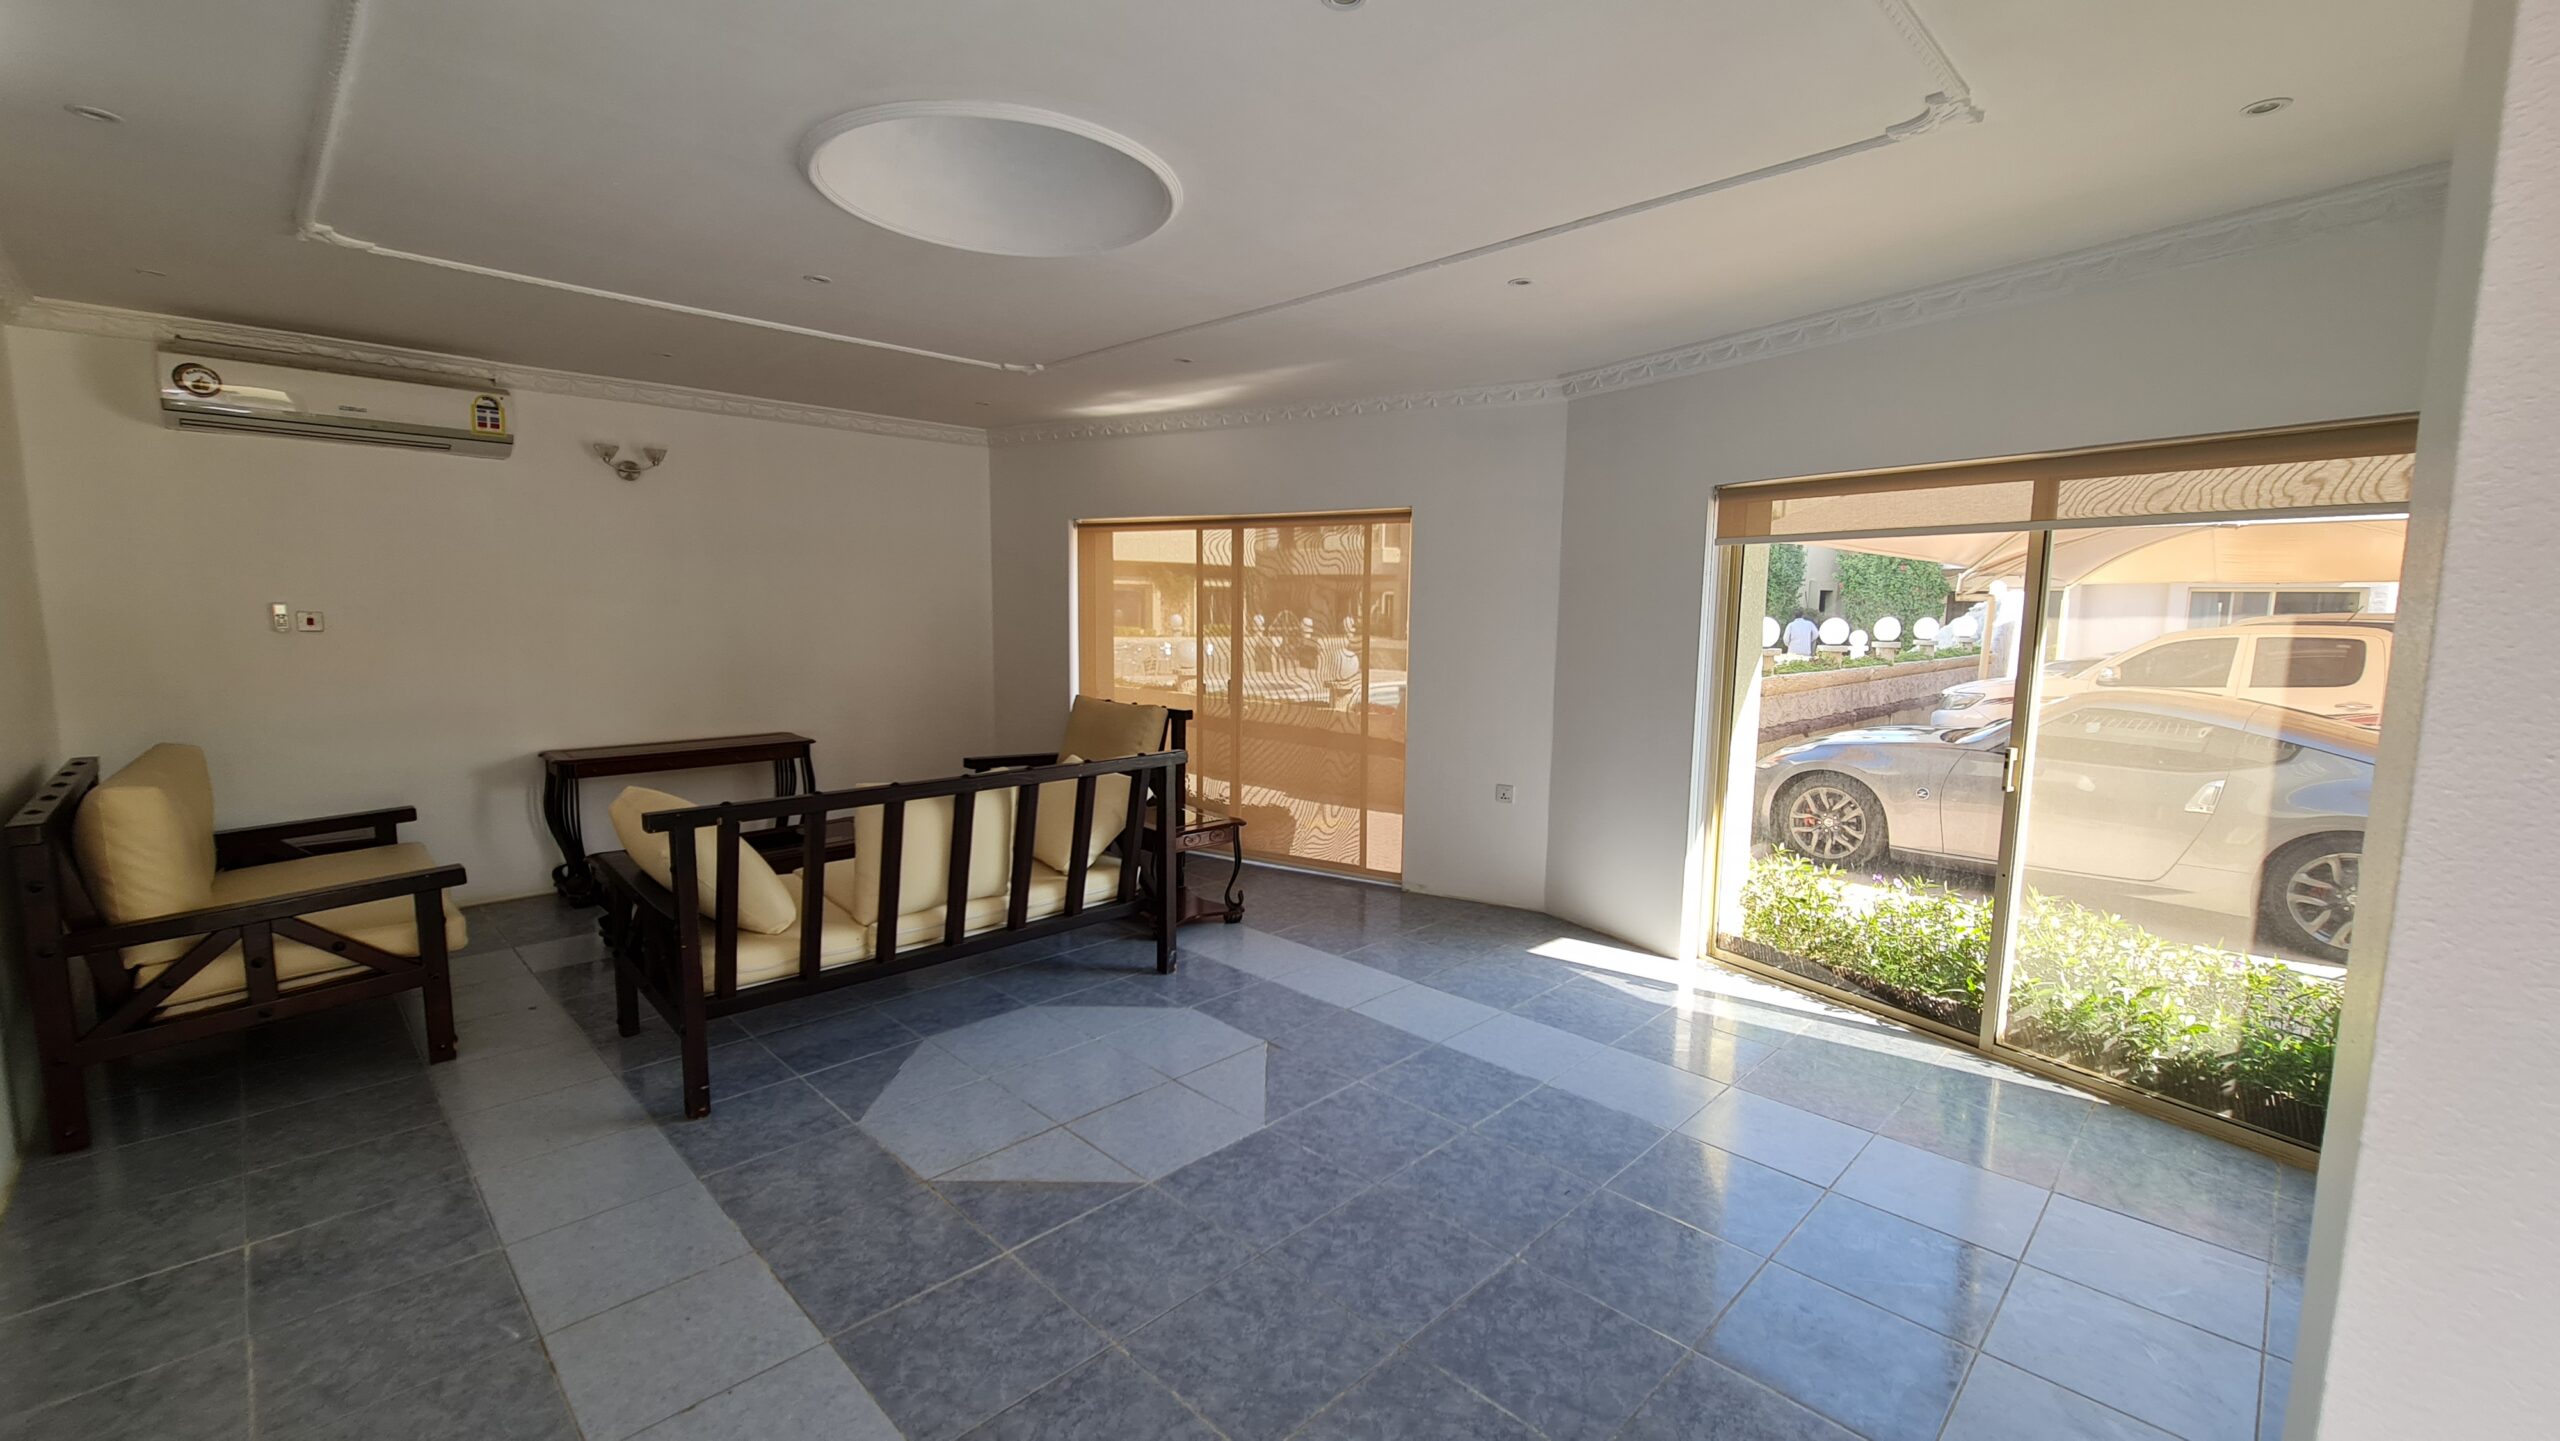 Villa for rent with 3 bedrooms, semi-furnished, located in Bu Ashira